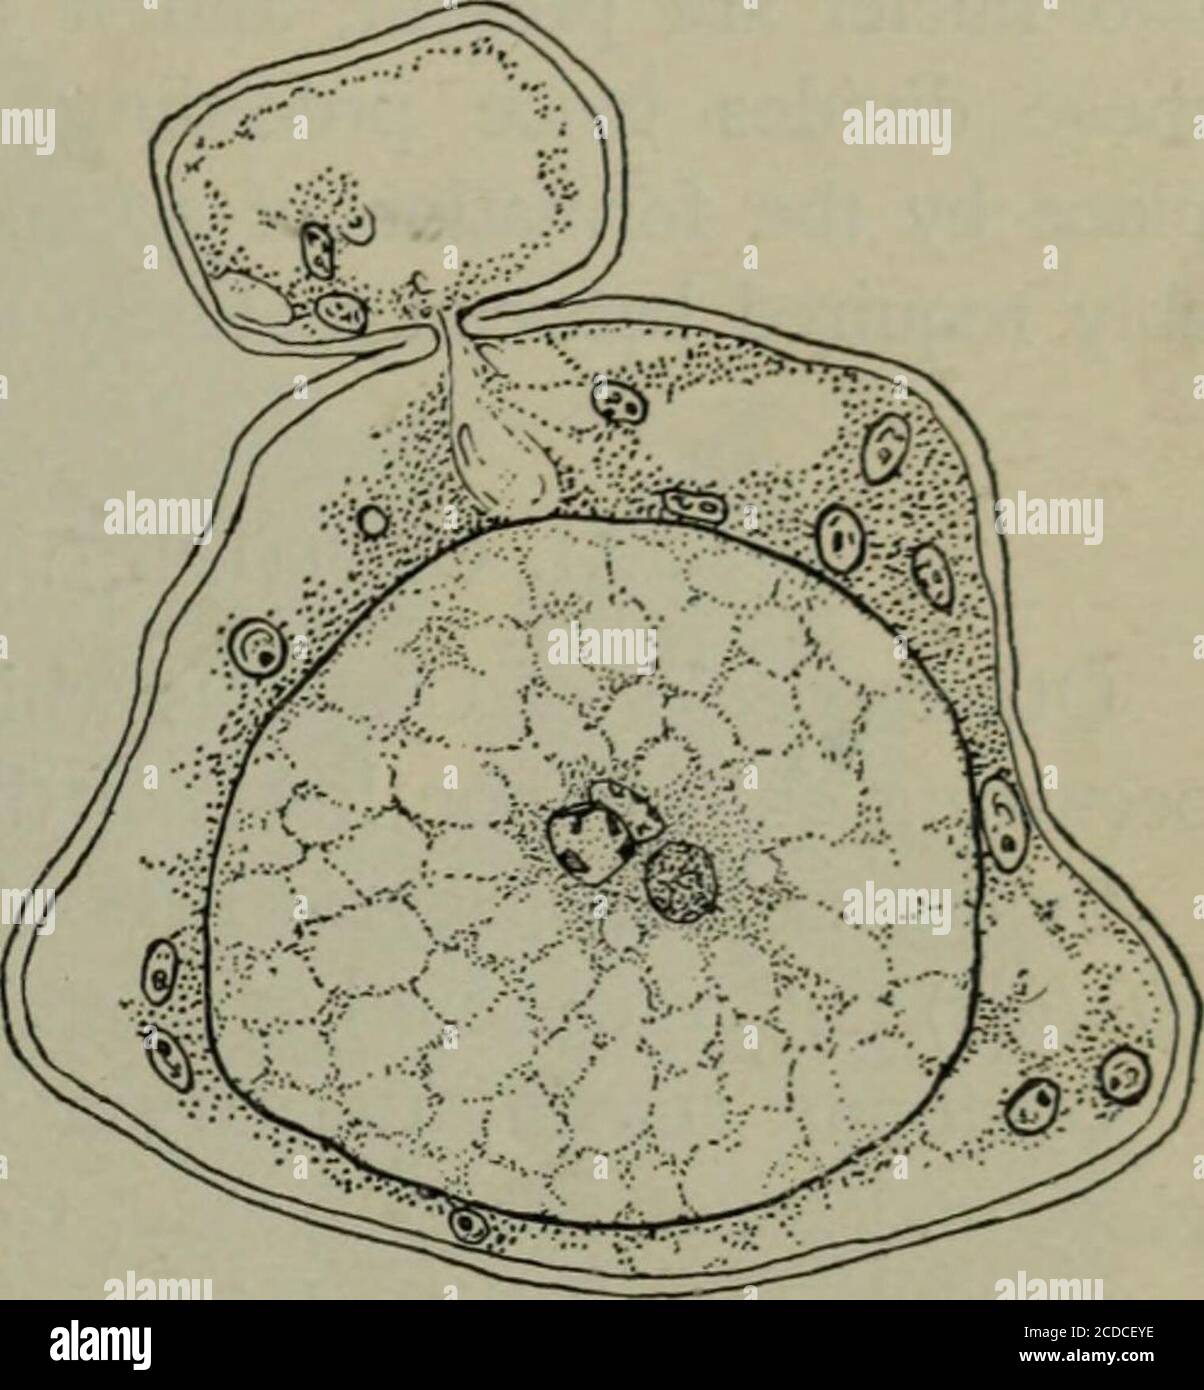 . Fungous diseases of plants, with chapters on physiology, culture methods and technique . Fig. 50. CoNiDiAL Stage, Fertilization, and GerminatingOospore of Cystopus. {b and c, after De Bary) conidial cushions, characteristic of the family to which this speciesbelongs, are prominent. The fungus. The conidial cushions occur upon leaves, stems,and floral parts, or fruits. On the majority of hosts, such asshepherds purse, horse radish, etc., oospores generally occur onlyin the stems, yet upon some other hosts, particularly upon certainmustards in the western United States, oospores alone are com- Stock Photo